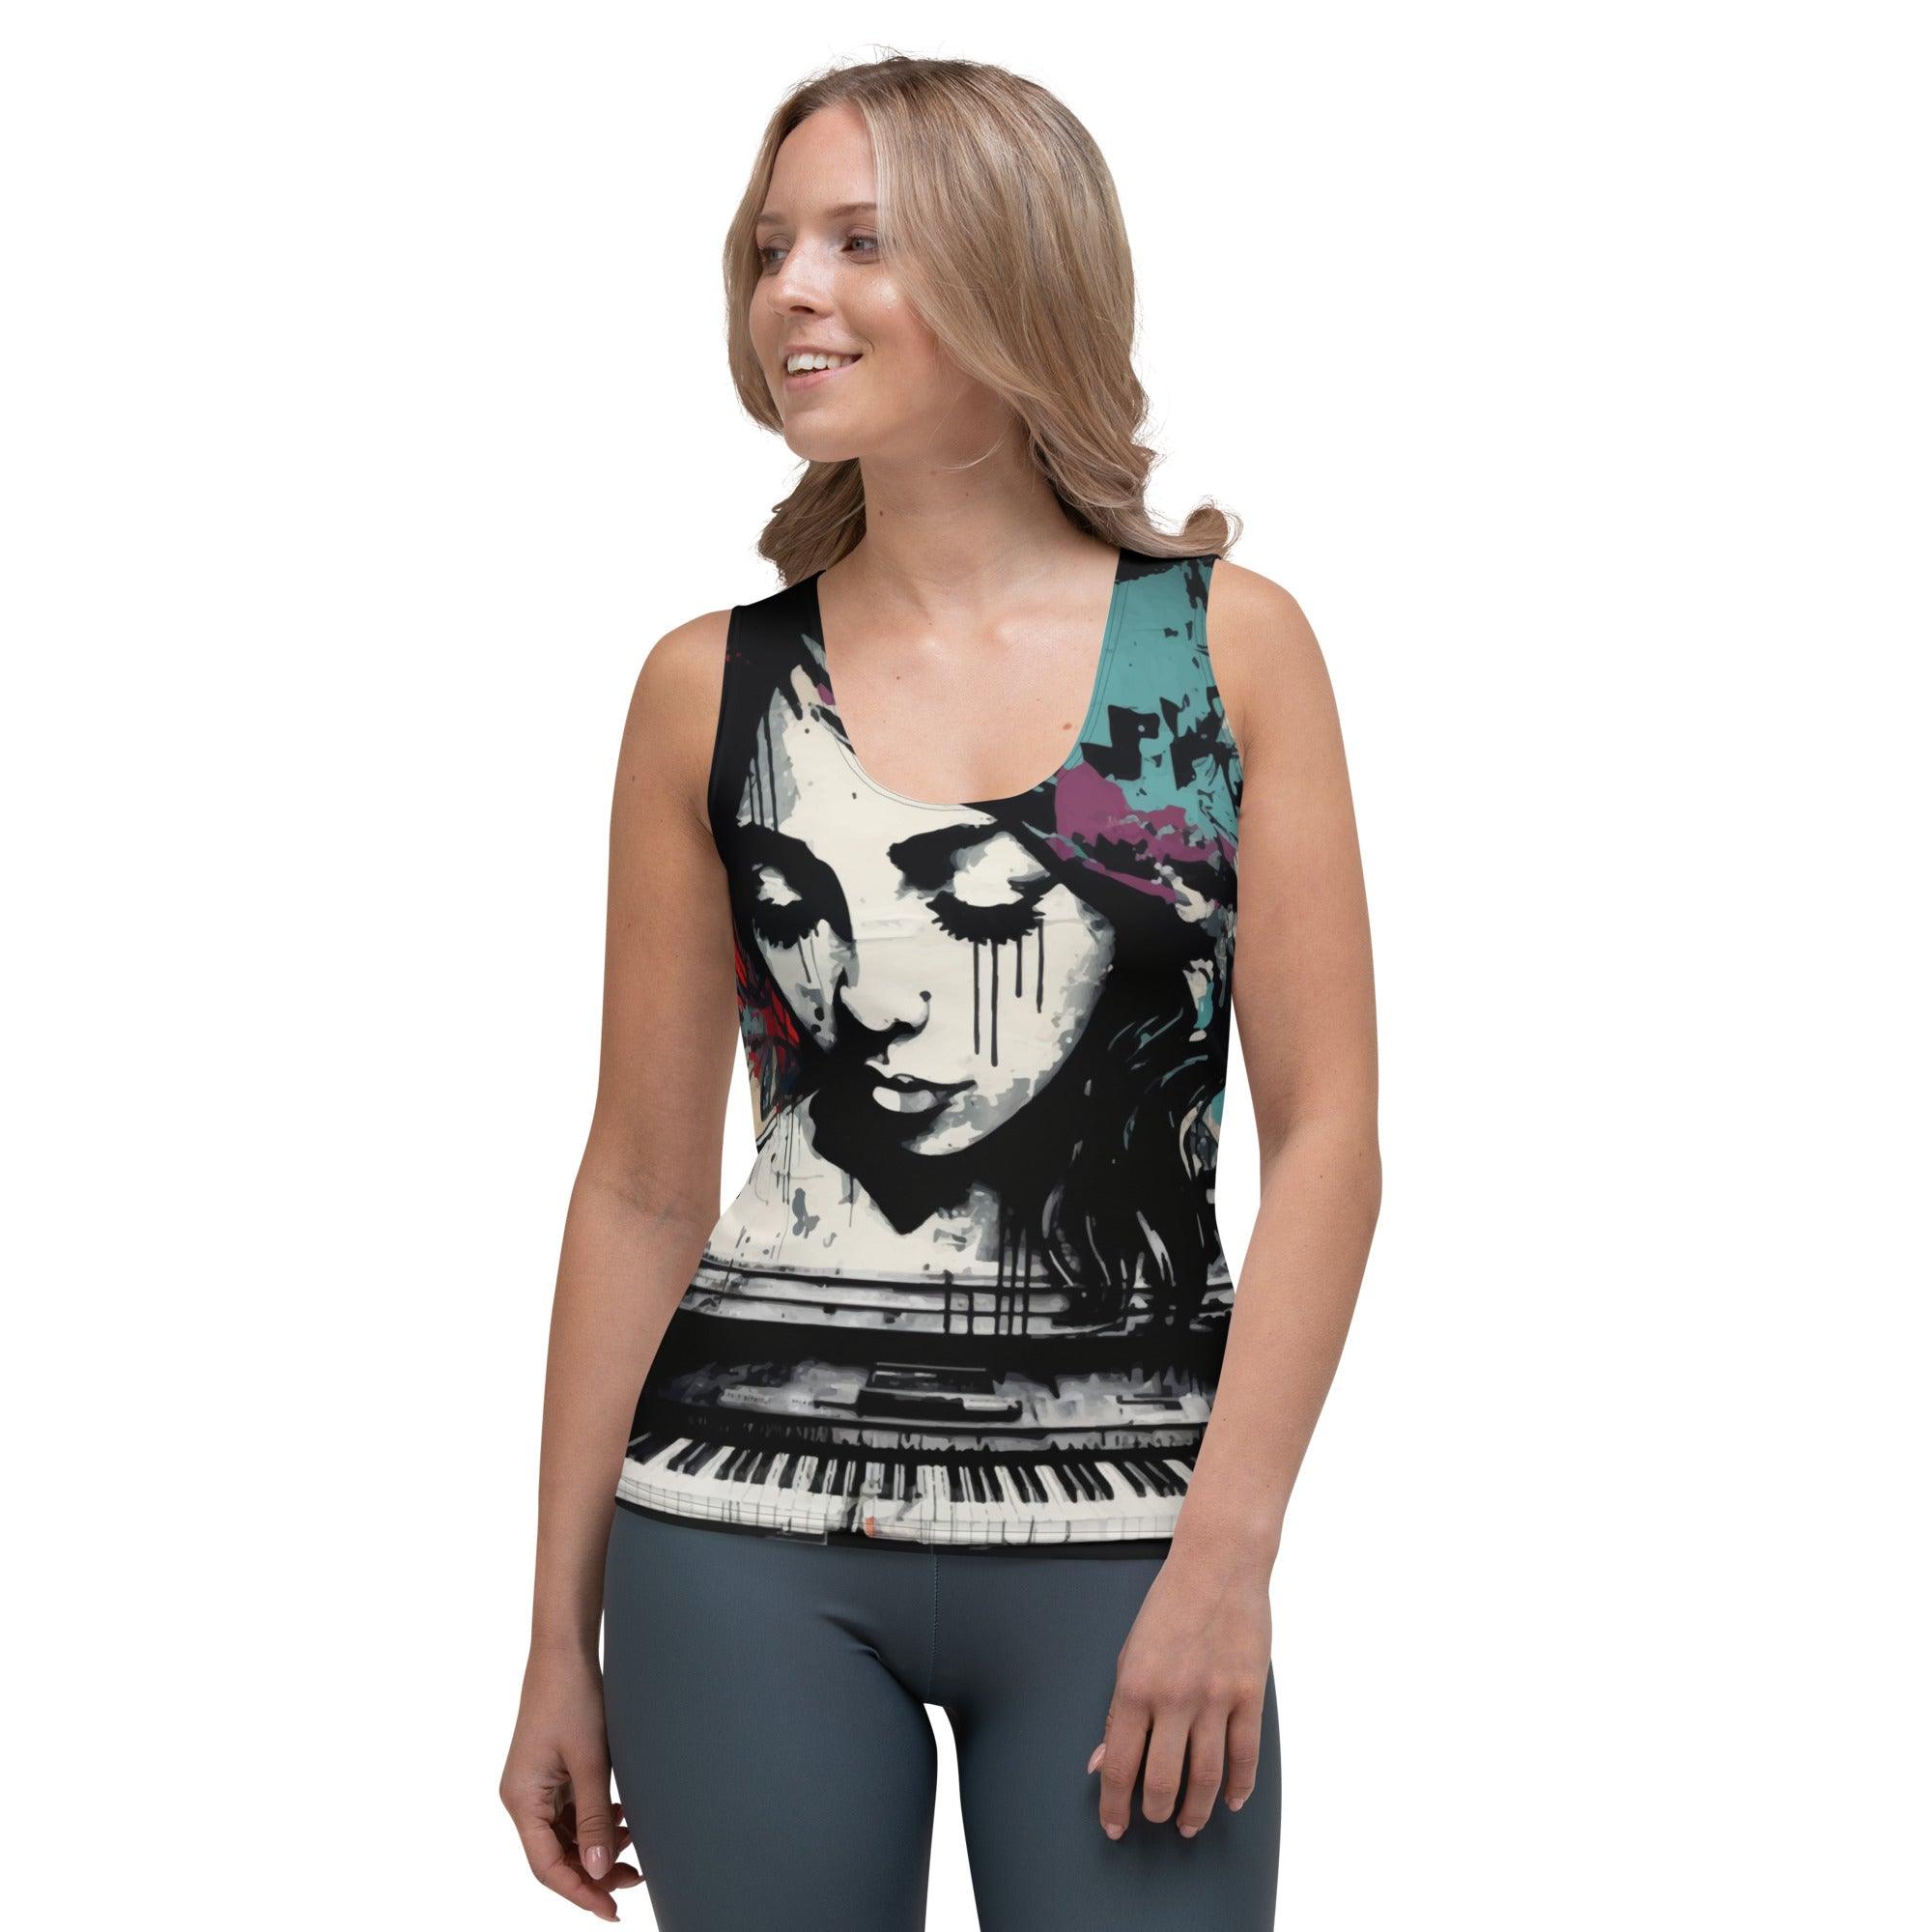 Her Fingers Sing Stories Sublimation Cut & Sew Tank Top - Beyond T-shirts